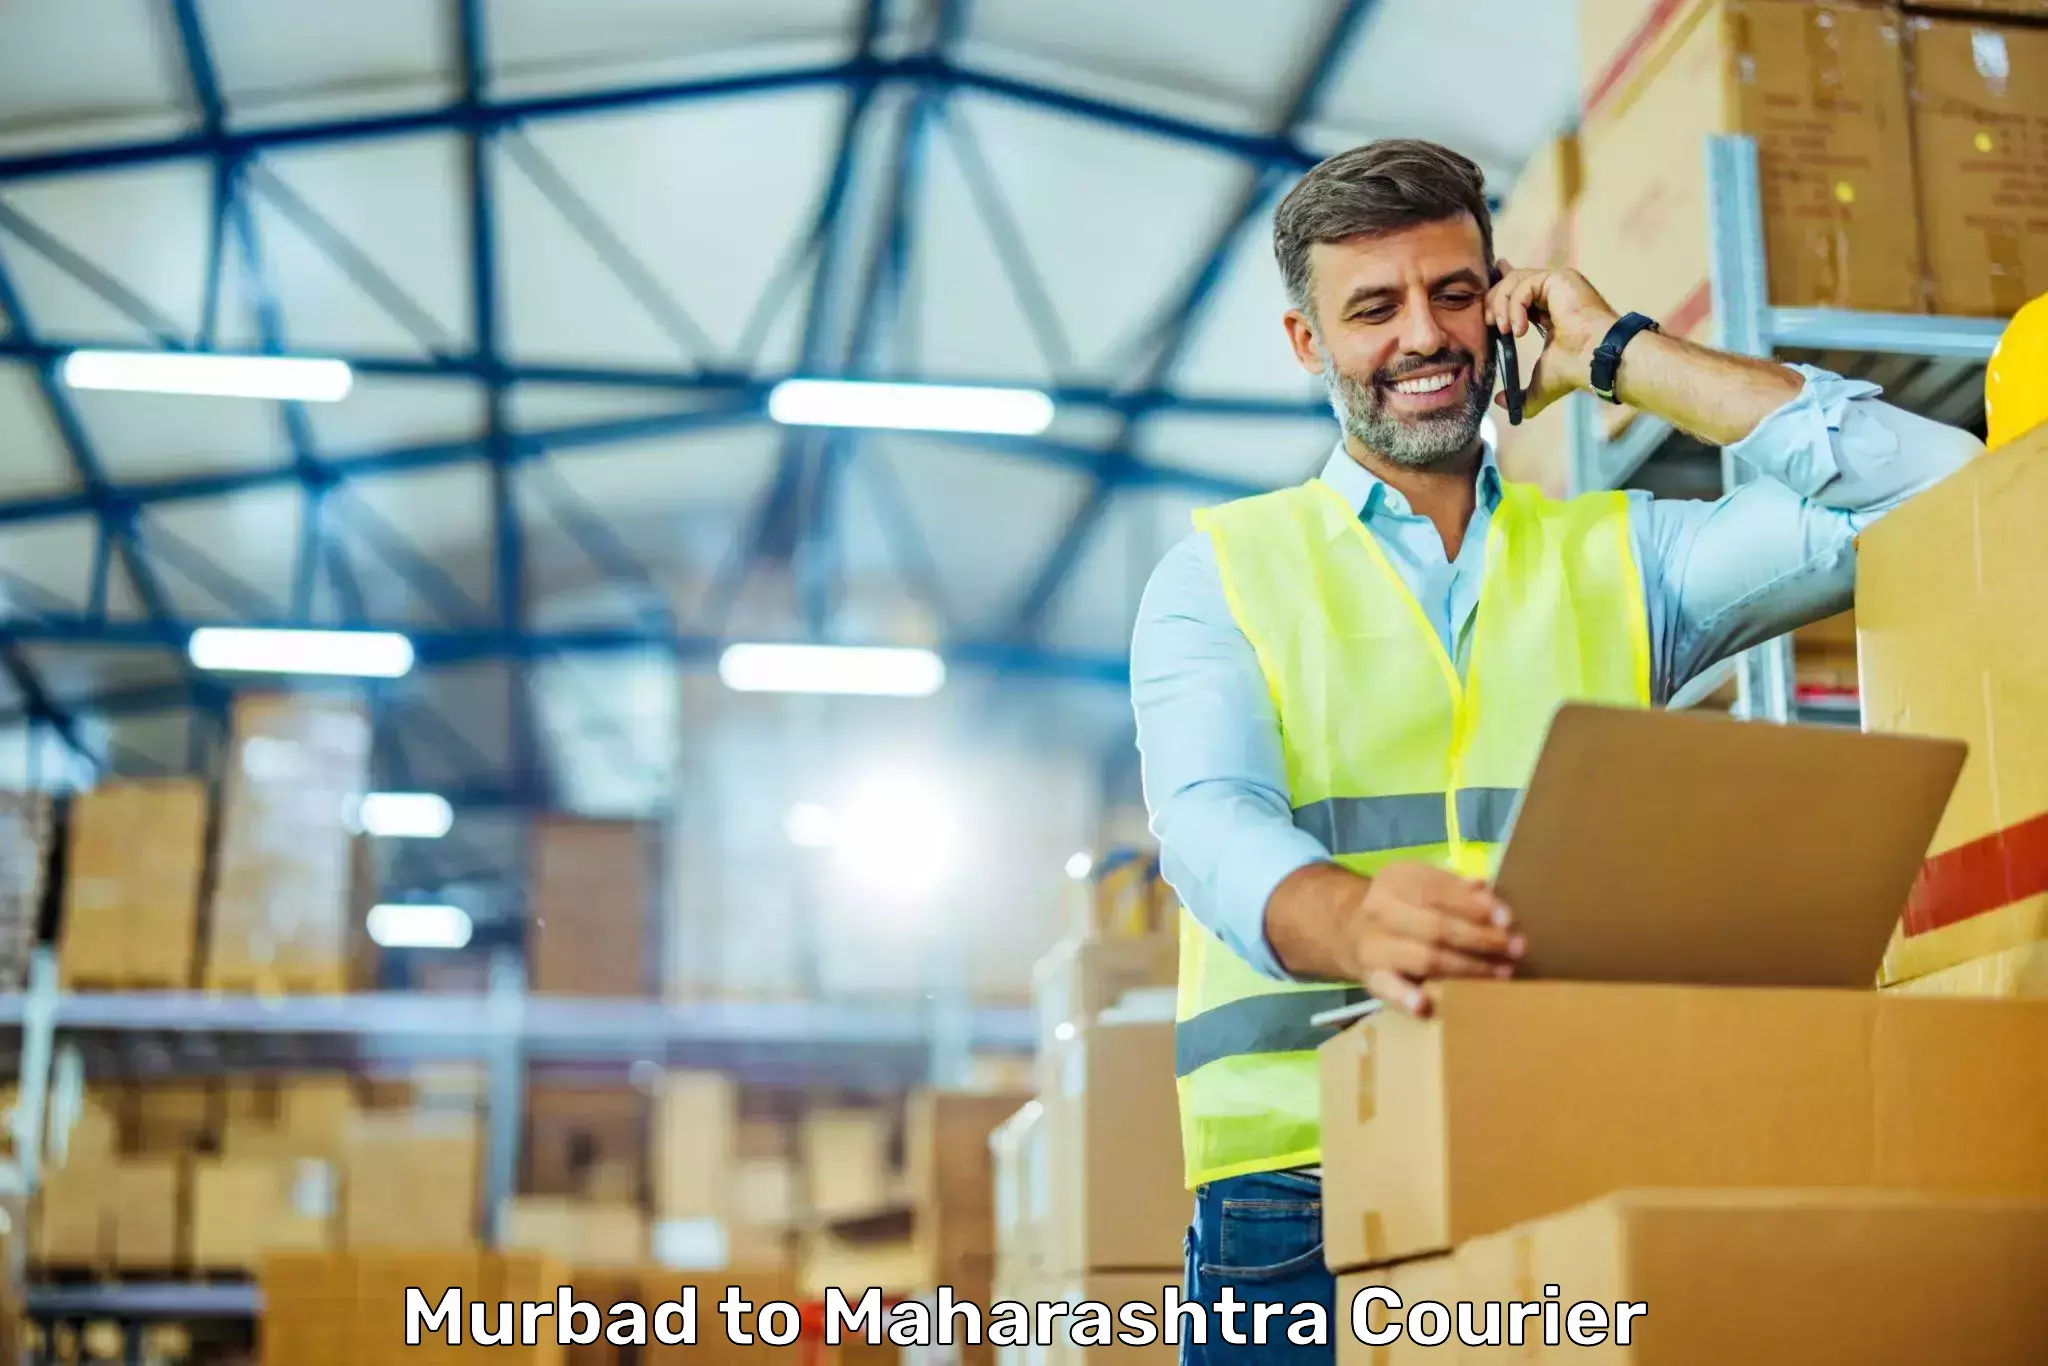 Professional courier services in Murbad to Kalyan Dombivli